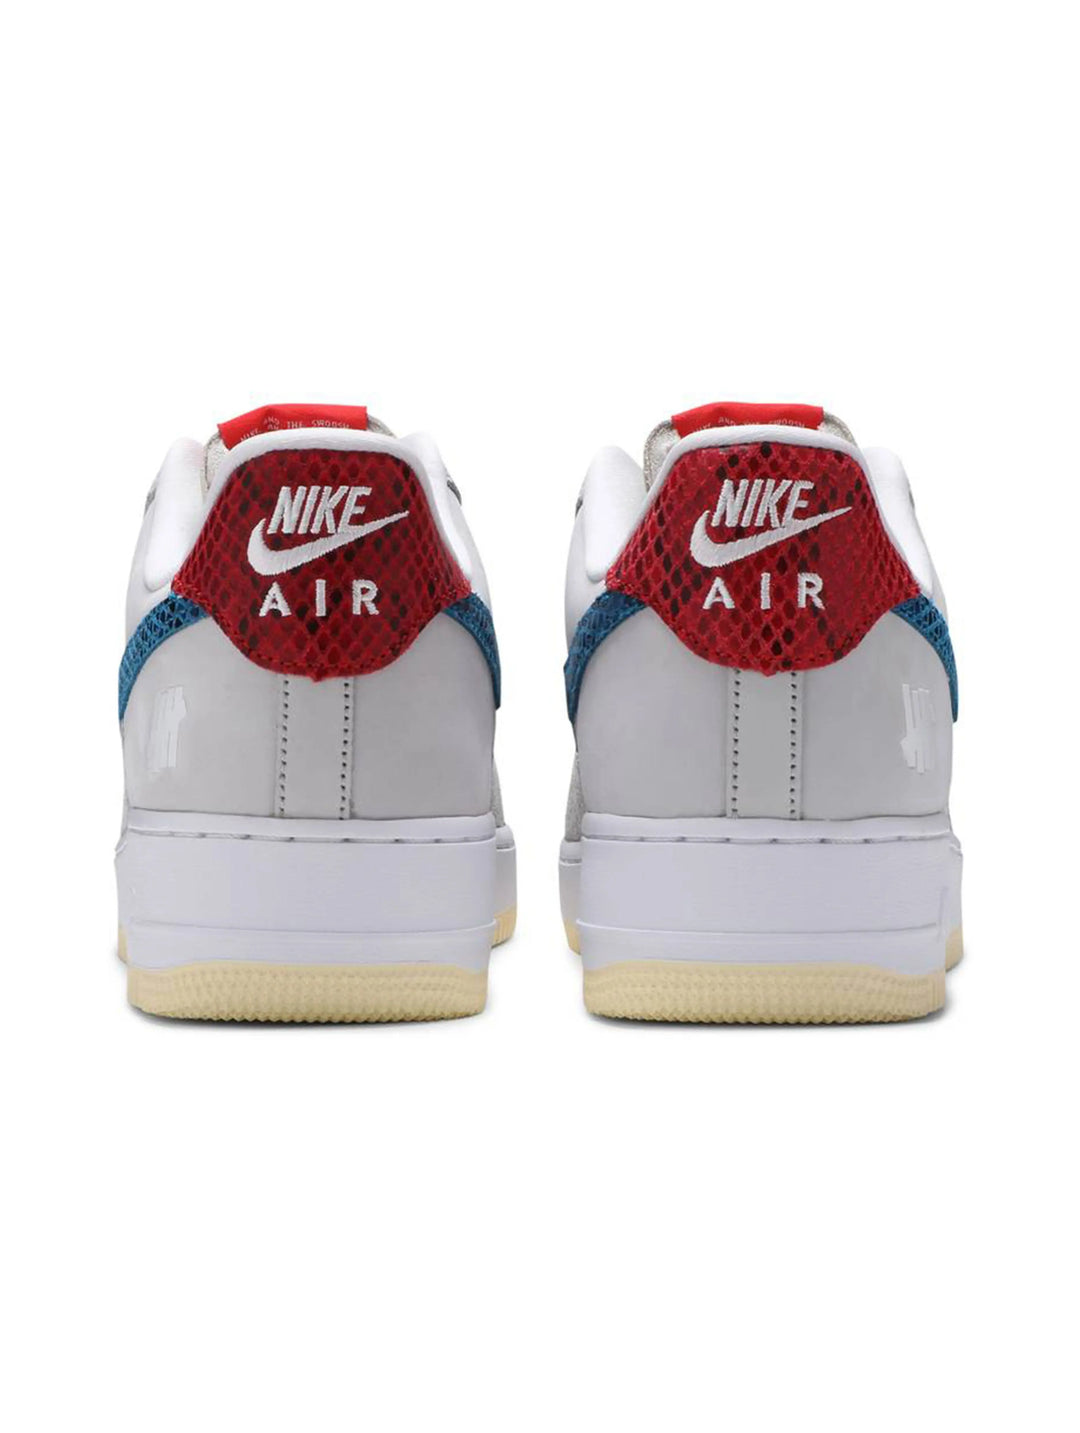 Nike Air Force 1 Low SP Undefeated 5 On It Prior